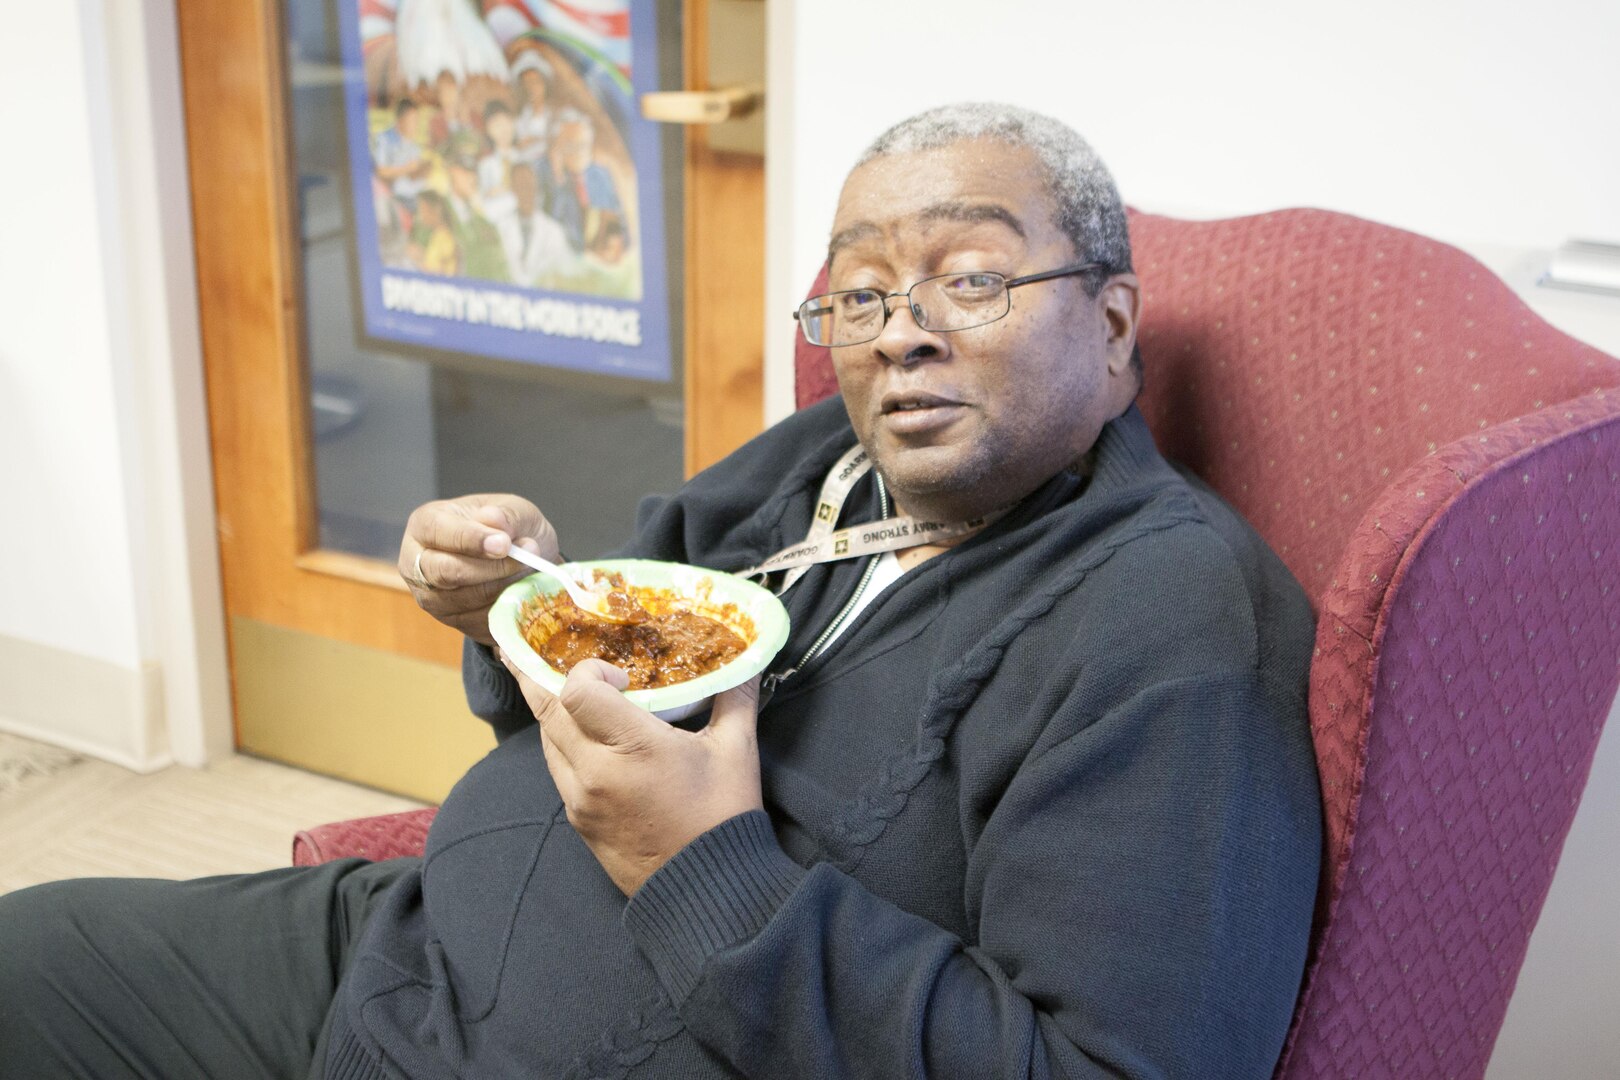 David Harris, DLA Distribution Current Operation, enjoys a bowl of chili during the chili cook off. “This is my best chili ever,” he says while wiping the sweat away.